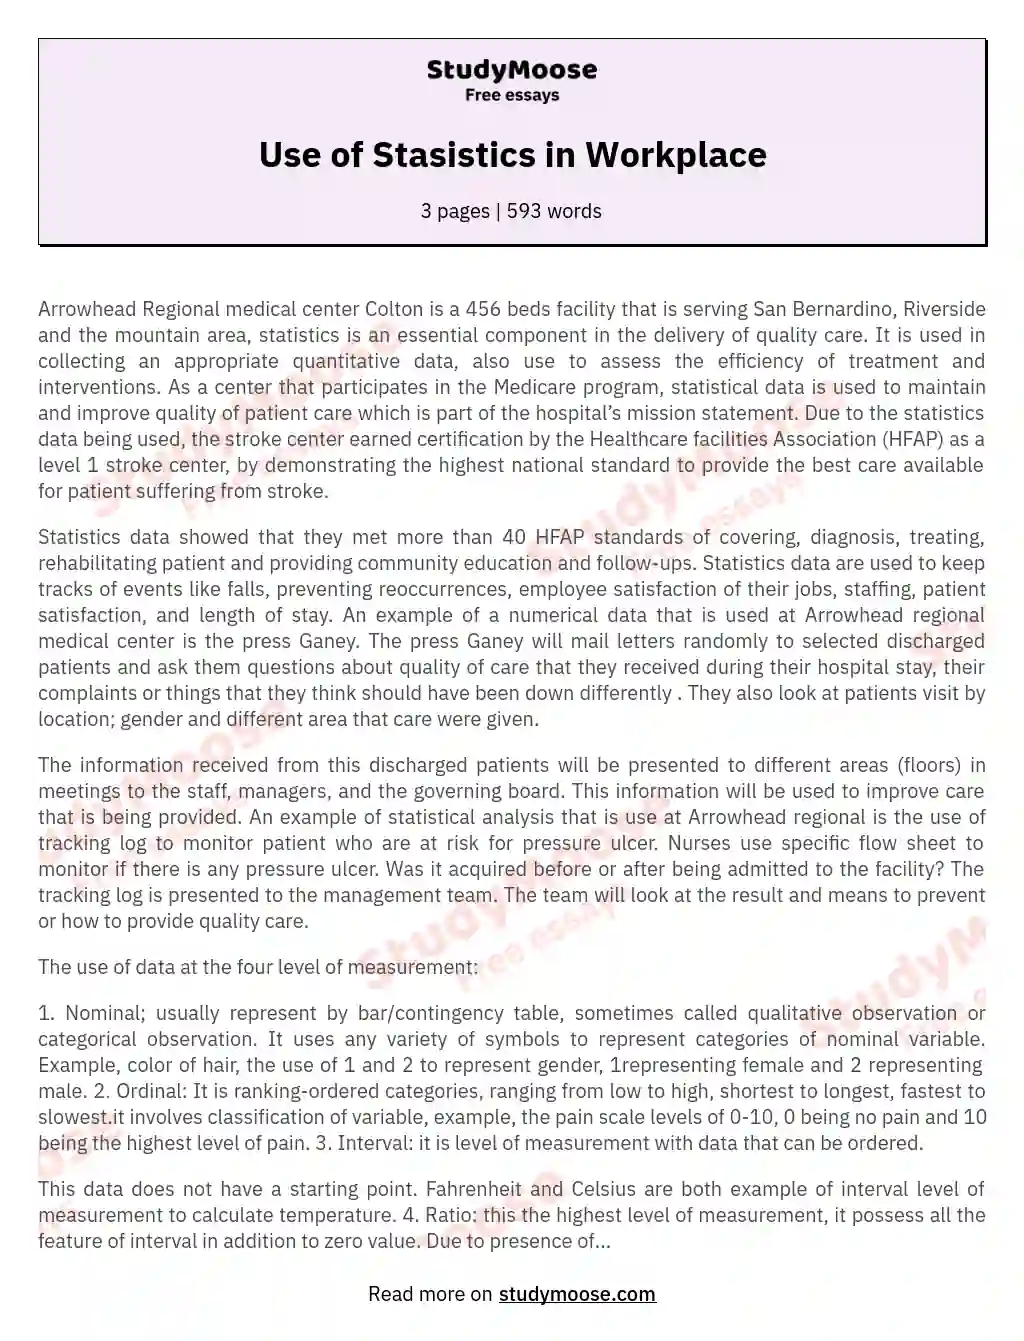 Use of Stasistics in Workplace essay